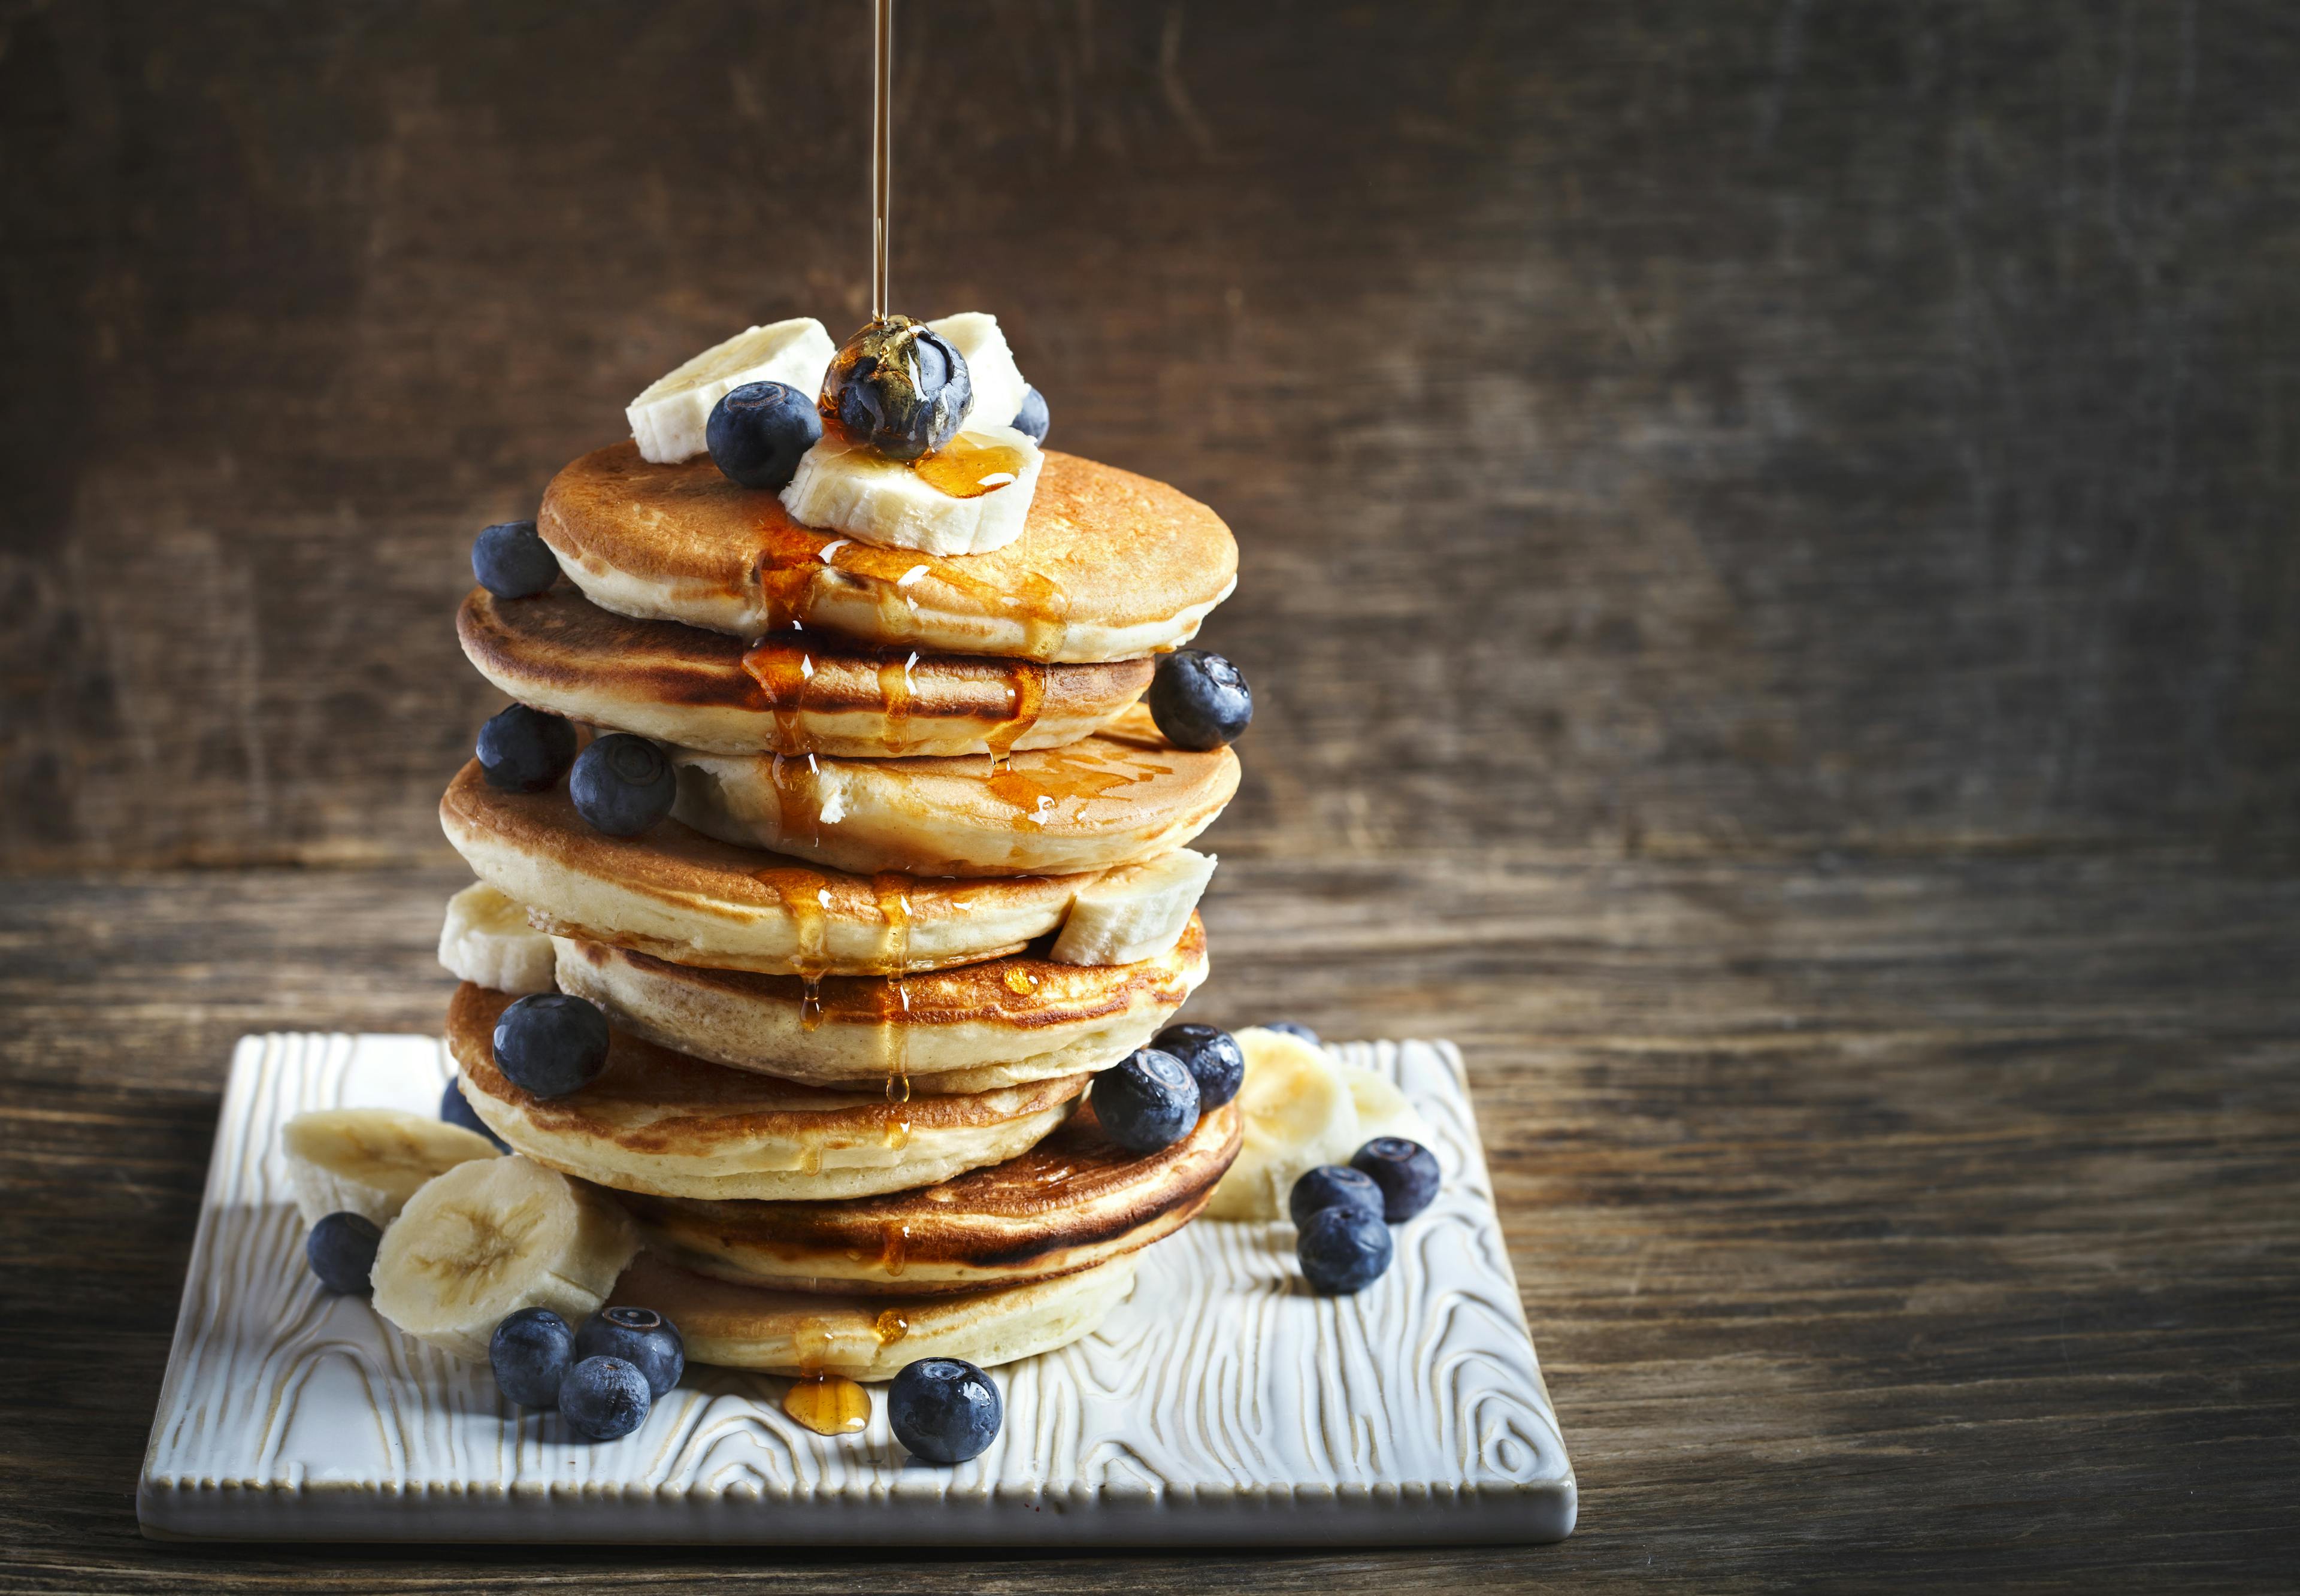 <p>Pancakes with banana, blueberry and maple syrup for a breakfast, wooden background, copy space</p>
